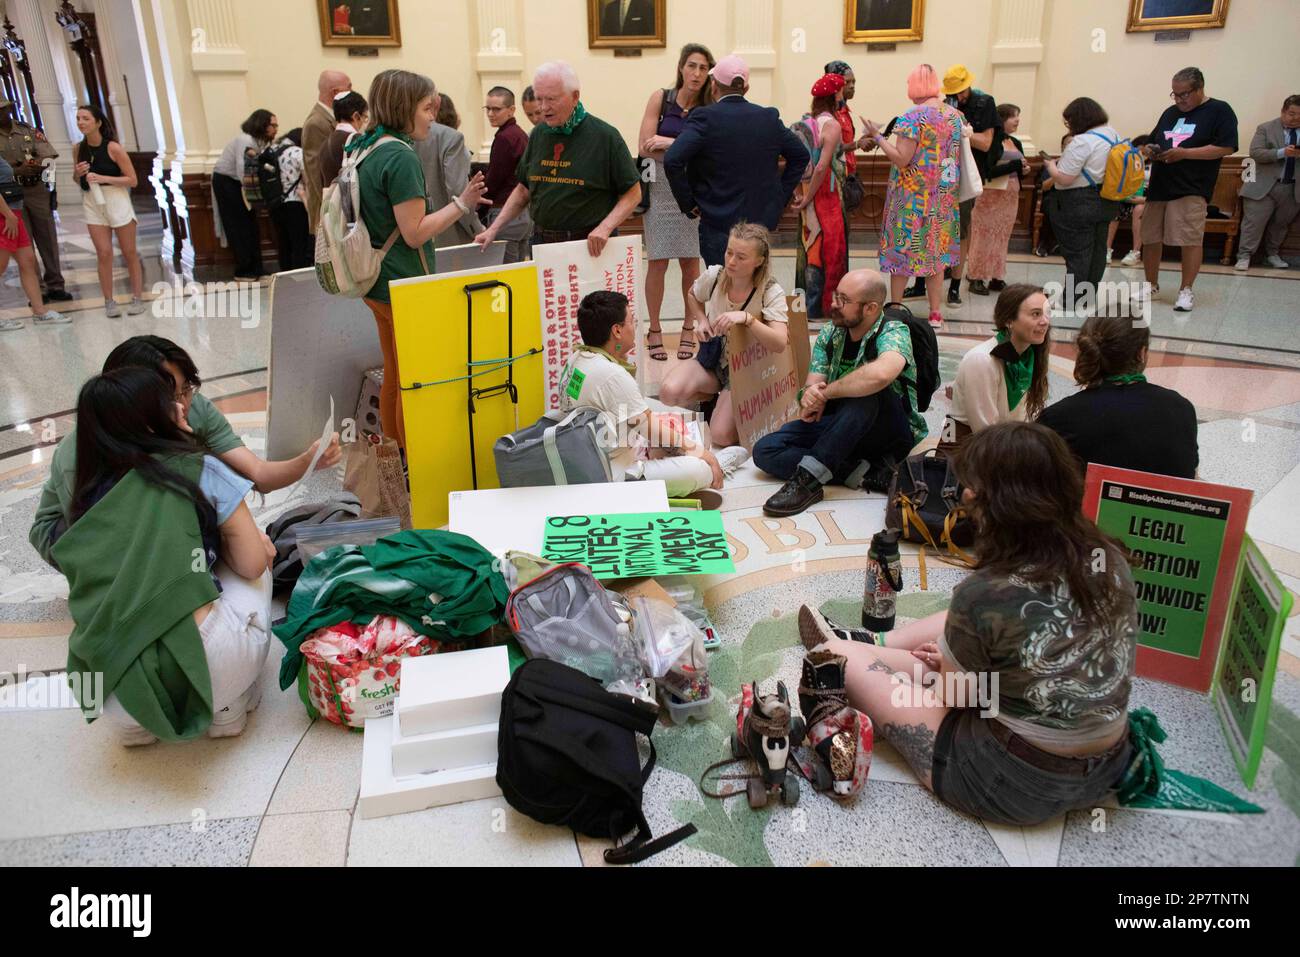 A group of men and women advocating for abortion rights participate in a sit-in in the Texas Capitol rotunda as part of an International Women's Day activity. Credit: Bob Daemmrich/Alamy Live News Stock Photo